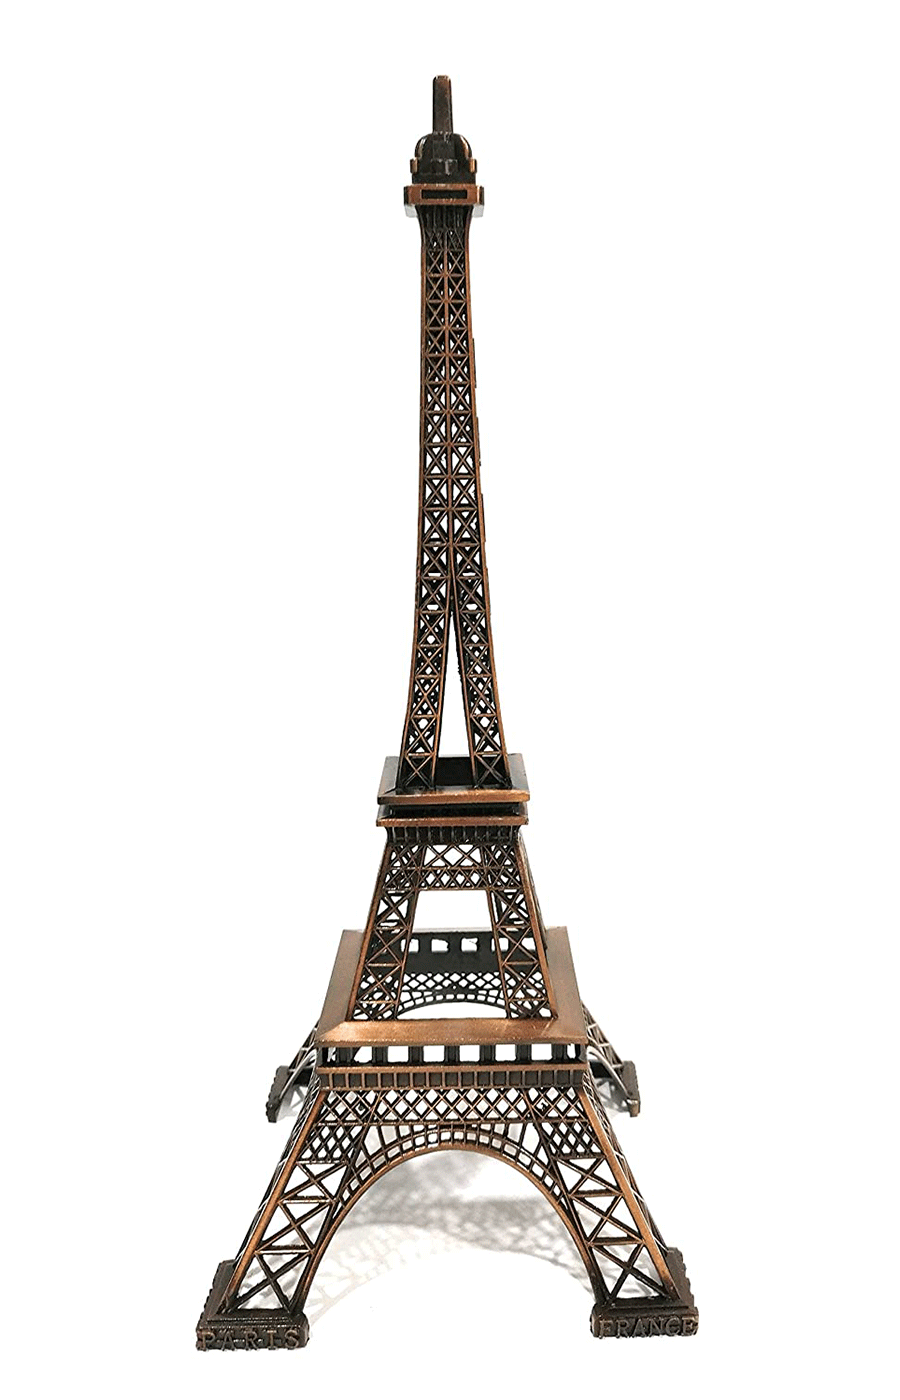 FunkyTradition 13 CM Tall Eiffel Tower Statue Copper Metal Showpiece | Birthday Anniversary Gift and Home Office Decor 5" Tall